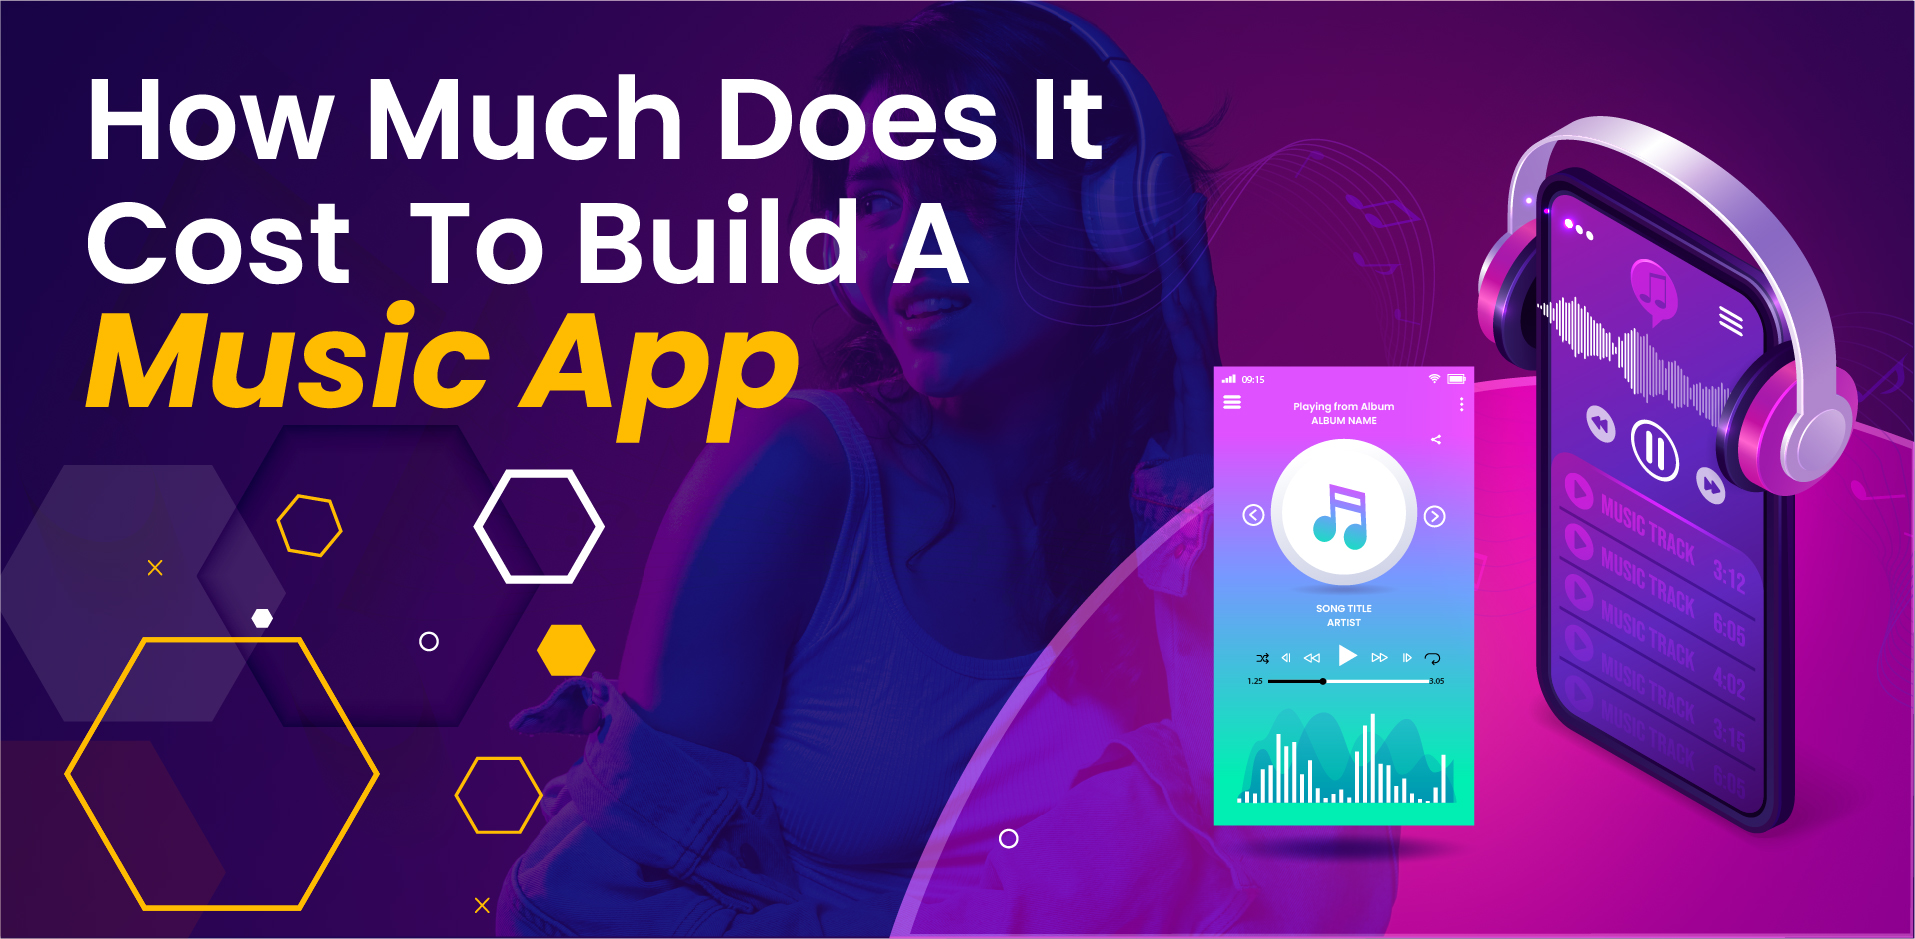 How Much Does It Cost To Build A Music App Like Tidal, Spotify, Pandora